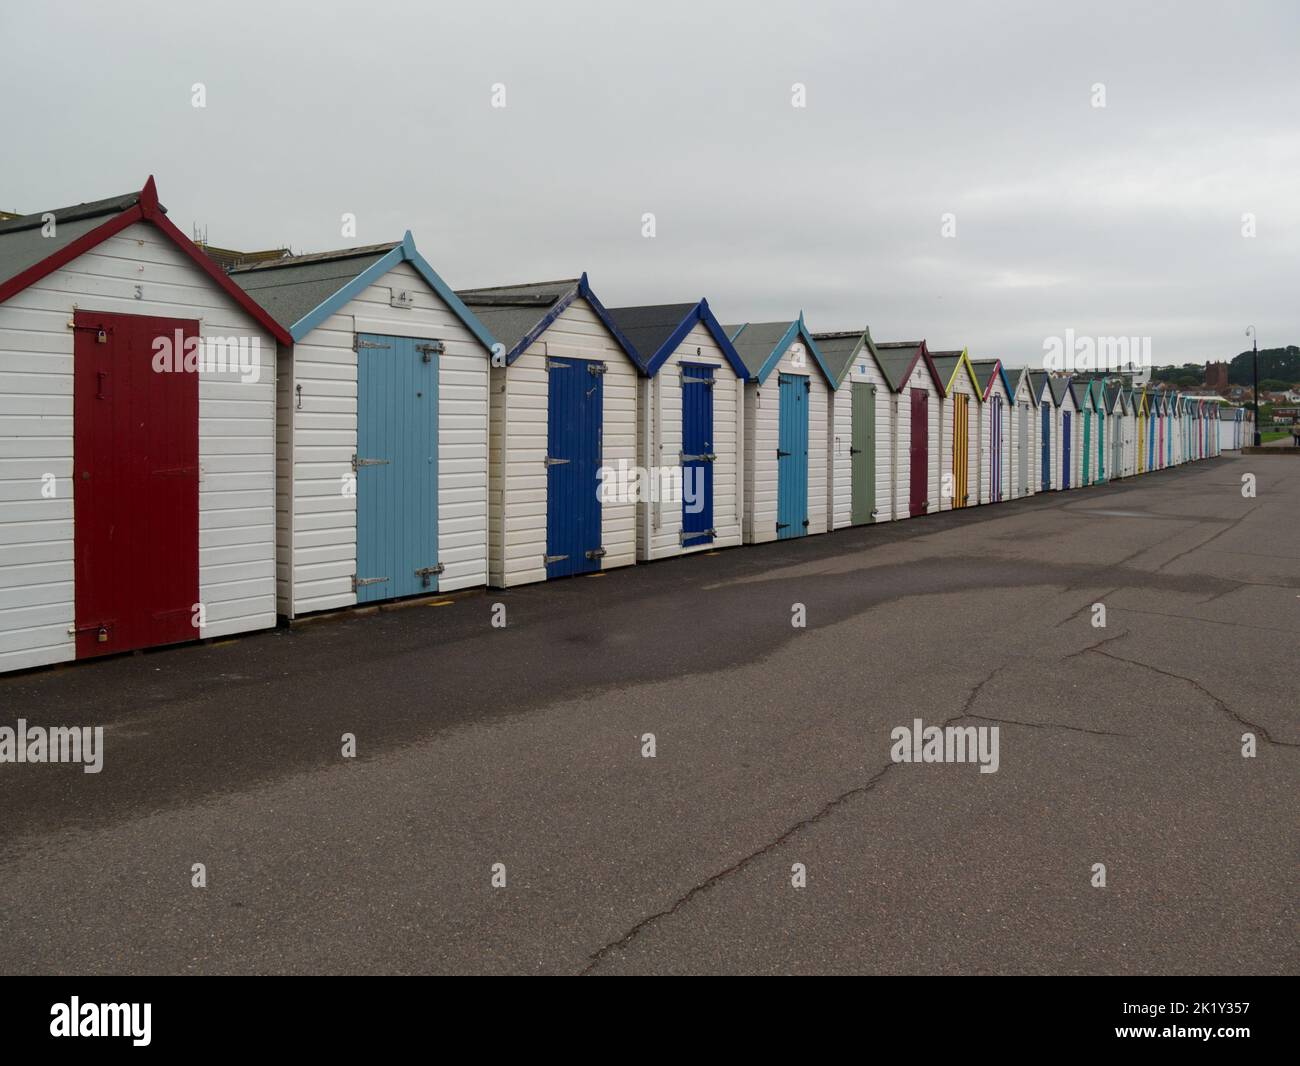 Row of colourful beach huts along Paignton seafront Devon England UK in this popular south coast seaside resort on English Riviera, Stock Photo